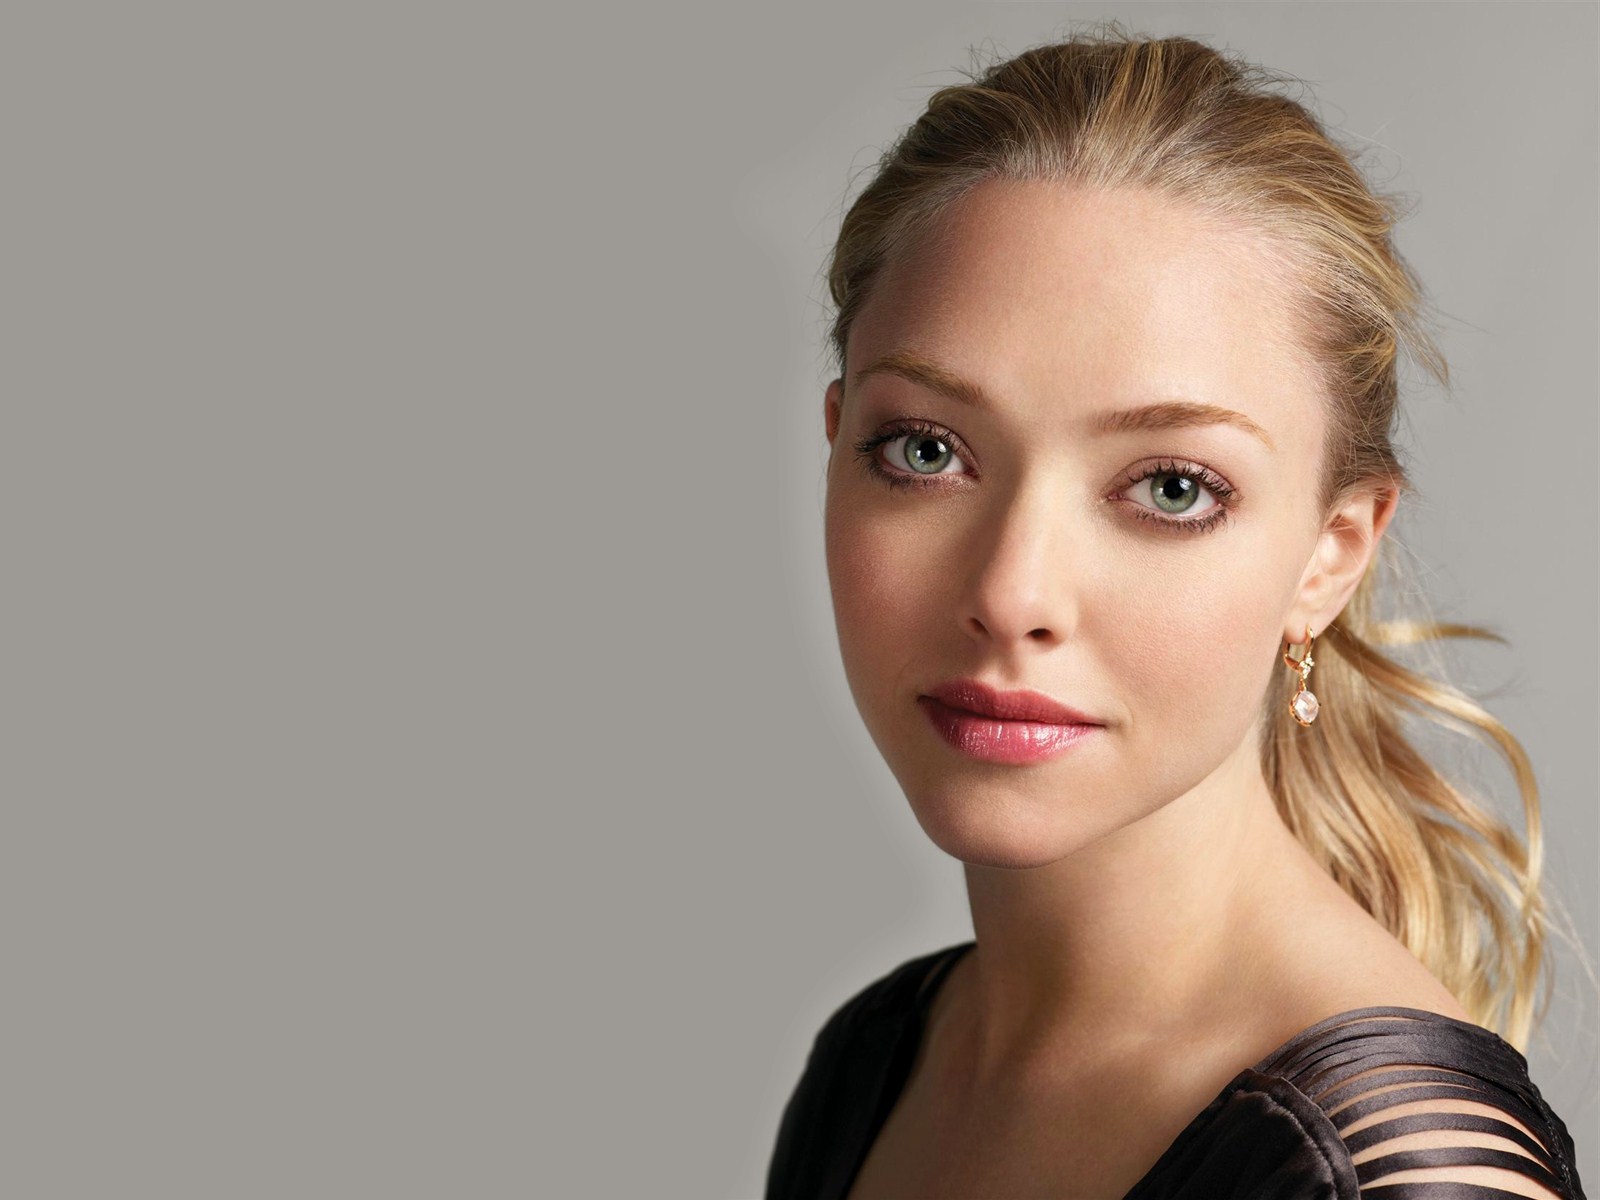 Amanda Seyfried Wallpaper Image Photos Pictures Background